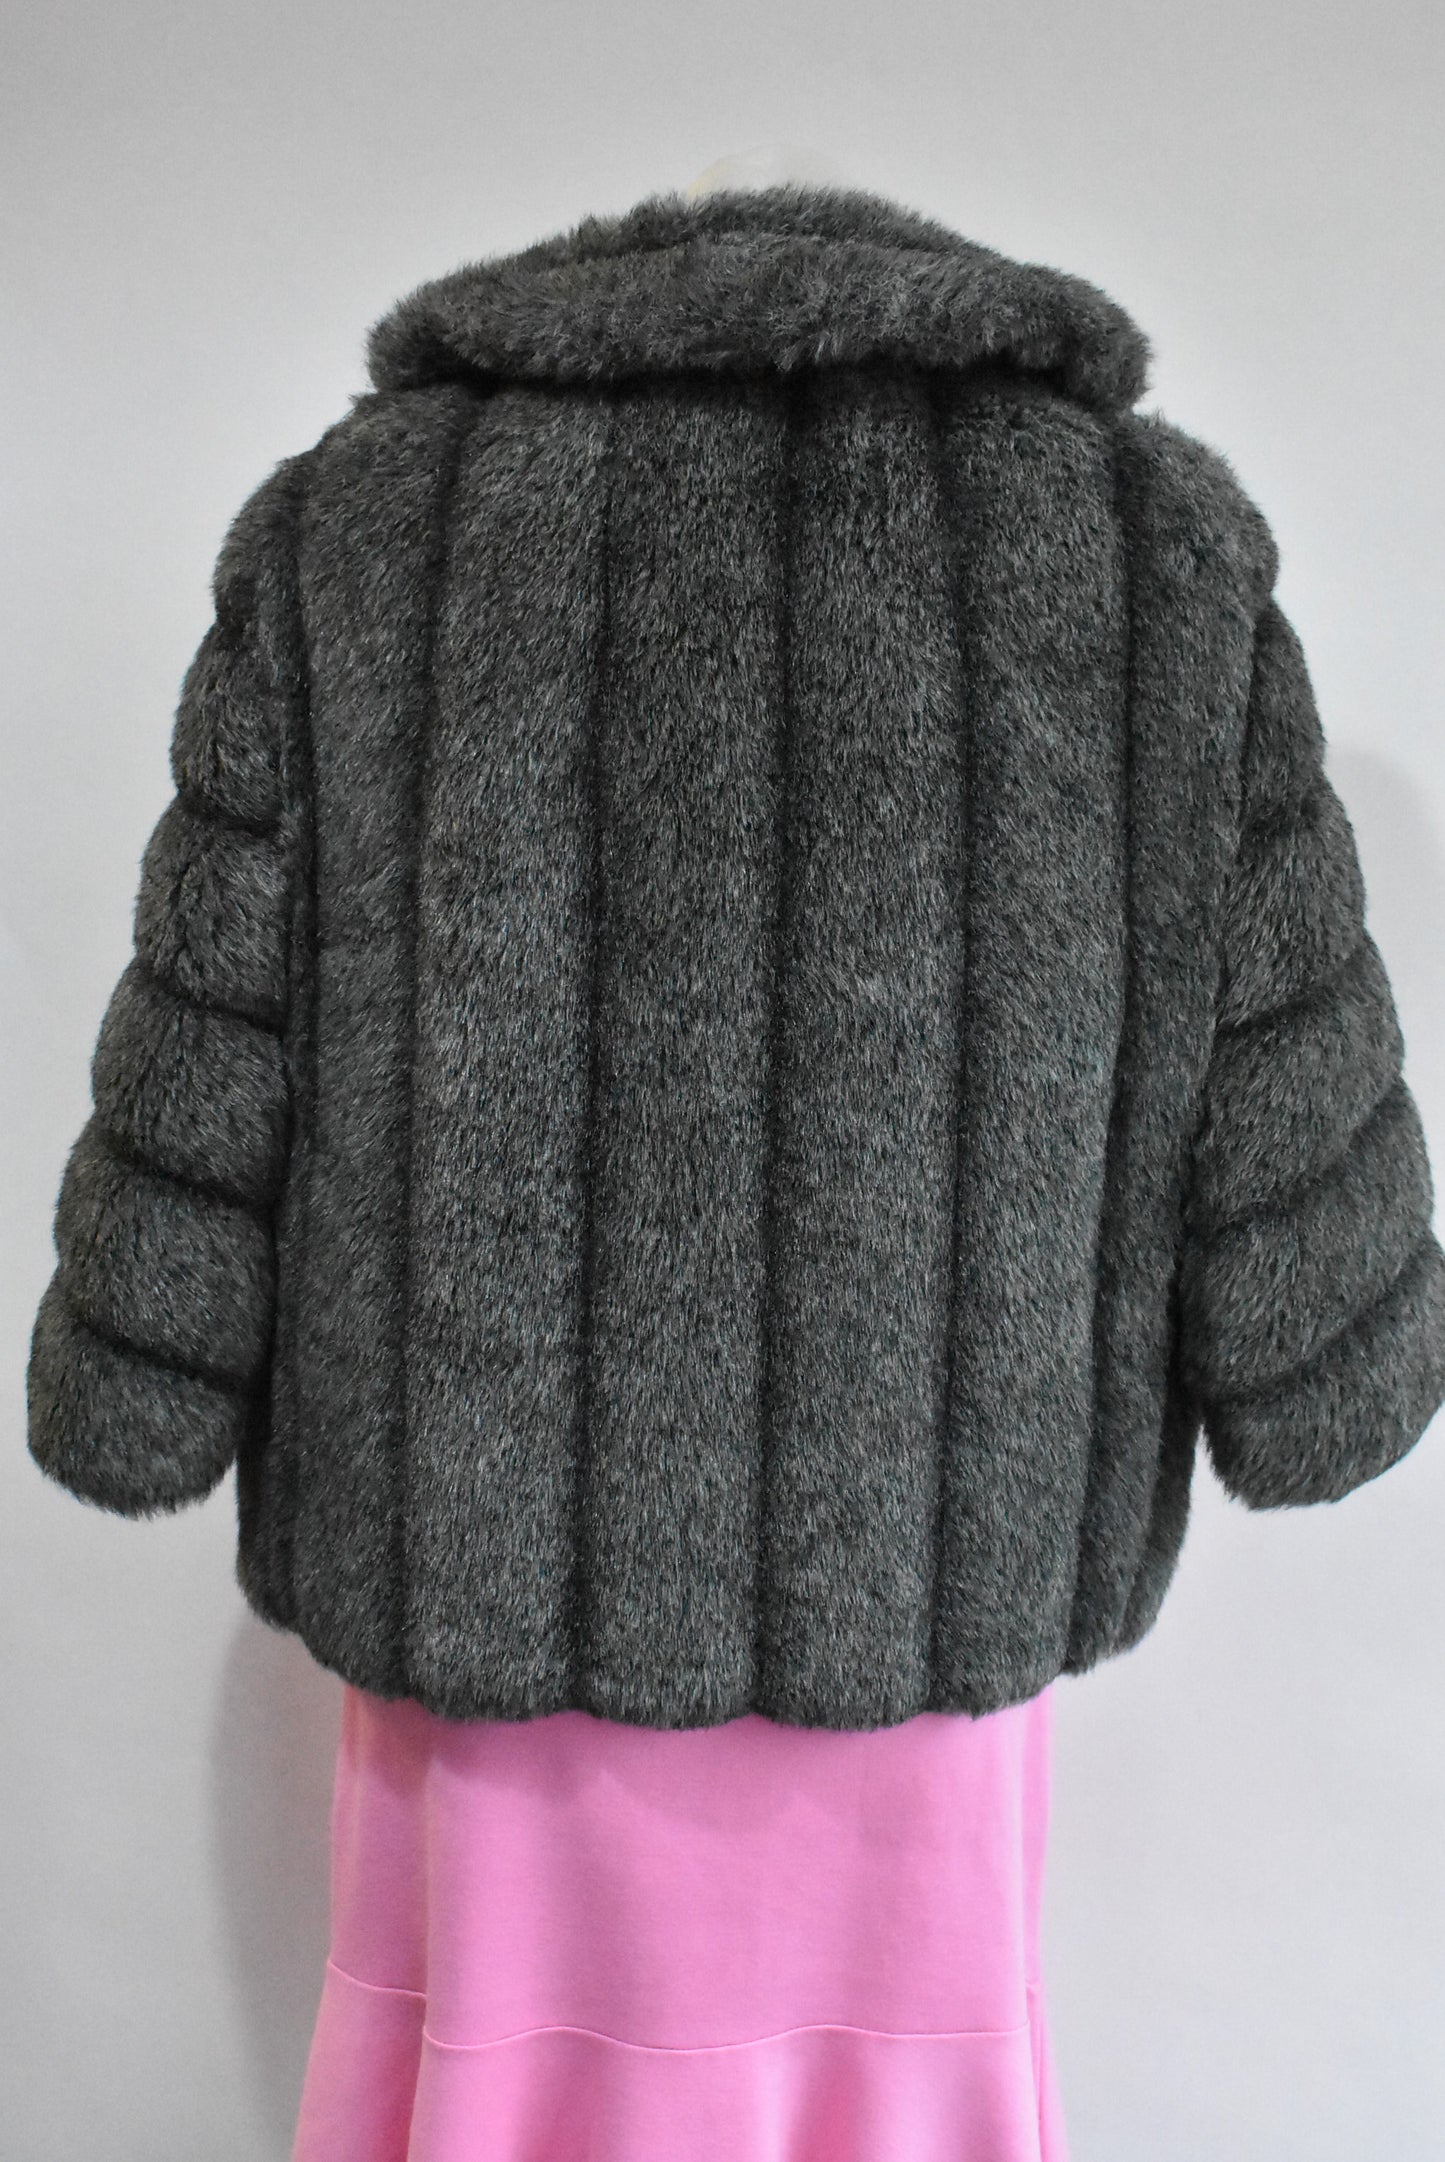 Hy Rose retro faux fur capelet made in nz, size 14